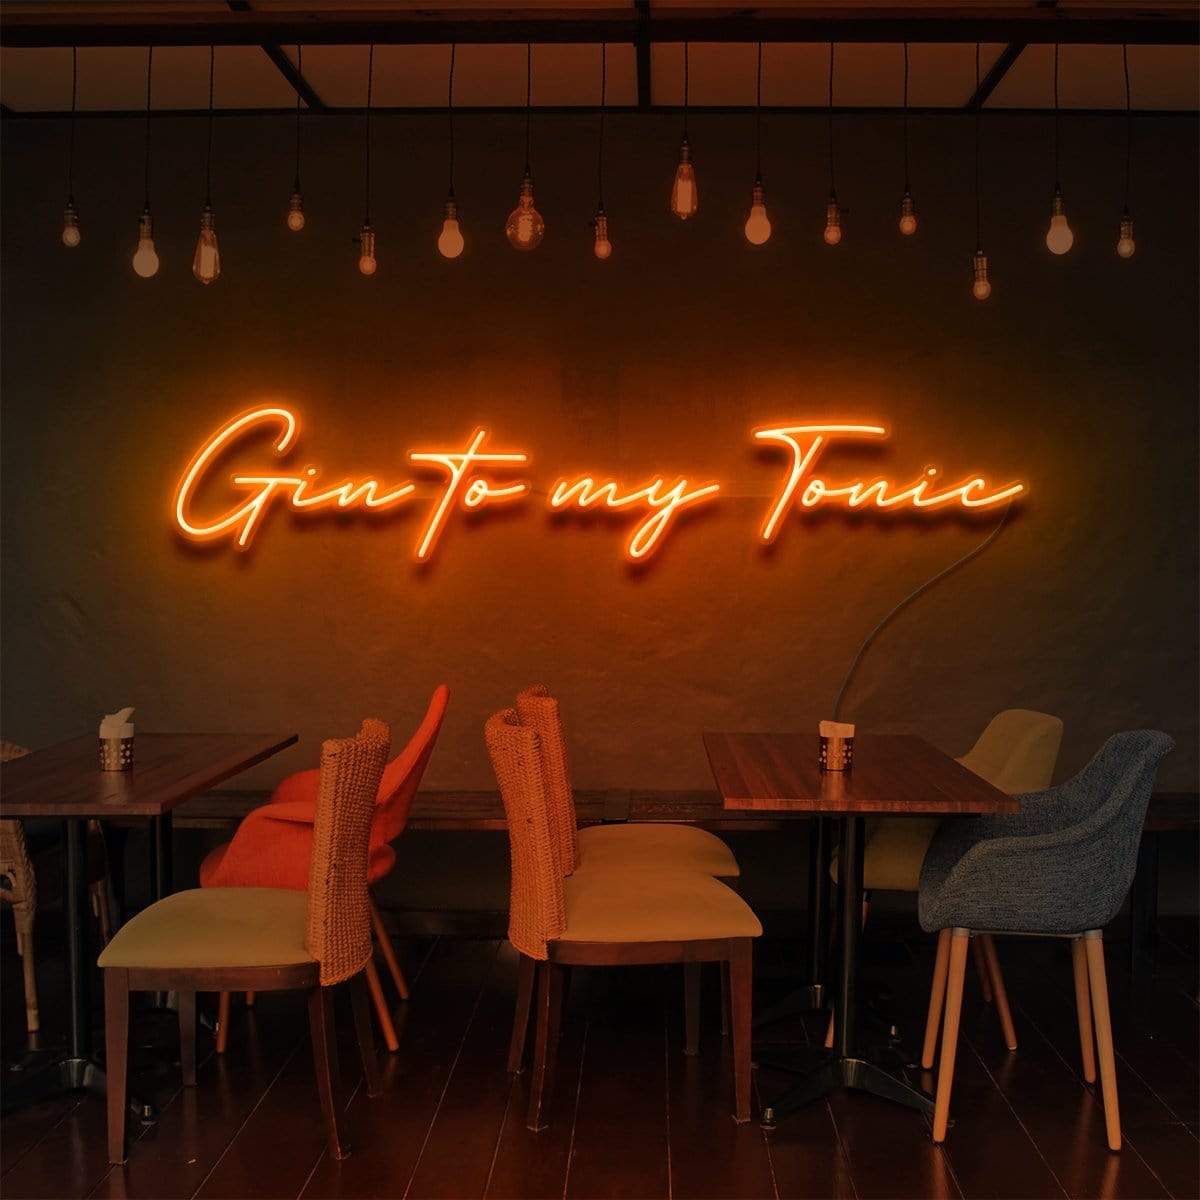 Gin to My Tonic" Neon Sign for Bars & Restaurants 90cm (3ft) / Orange / LED Neon by Neon Icons